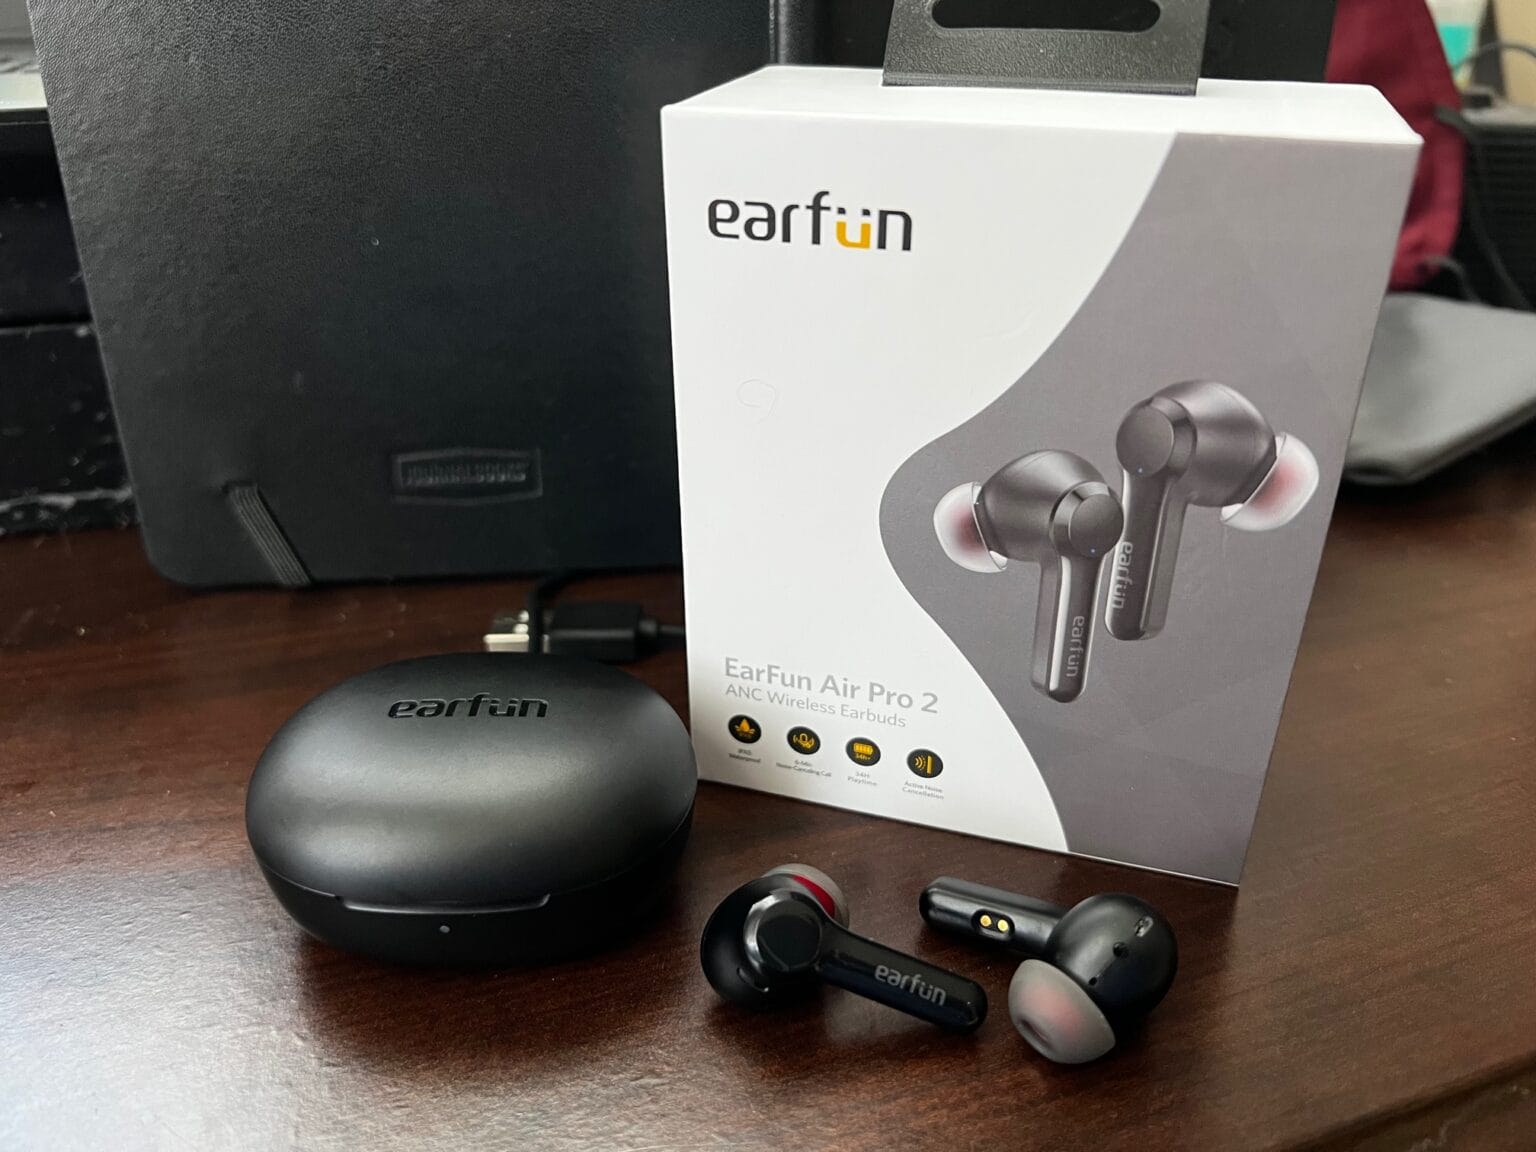 EarFun Air Pro 2 ANC Wireless Earbuds offer good sound for the price.